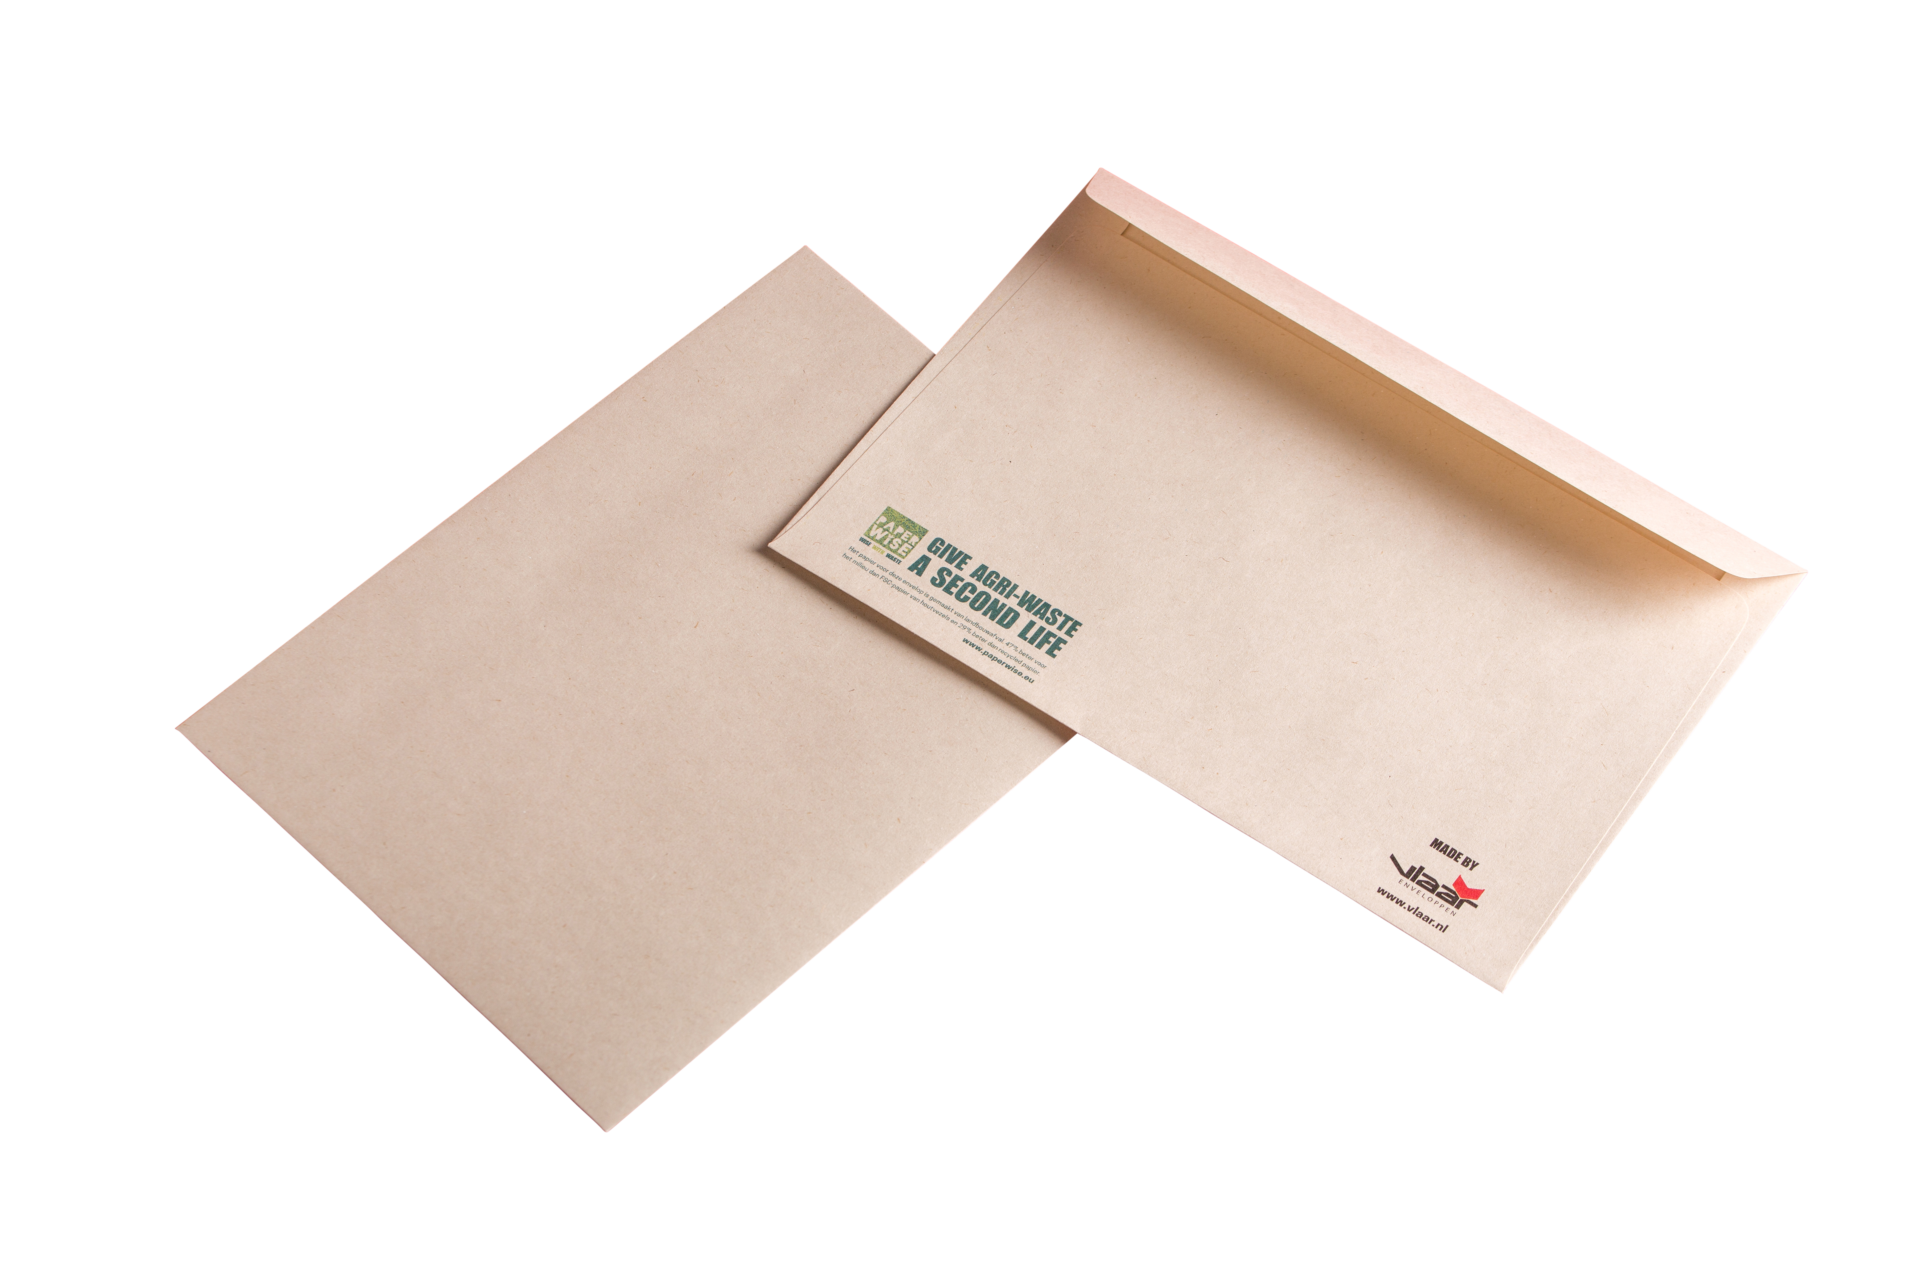 wp content uploads  0   0   eco friendly paper board office sustainable envelopes mailing white natural  9c